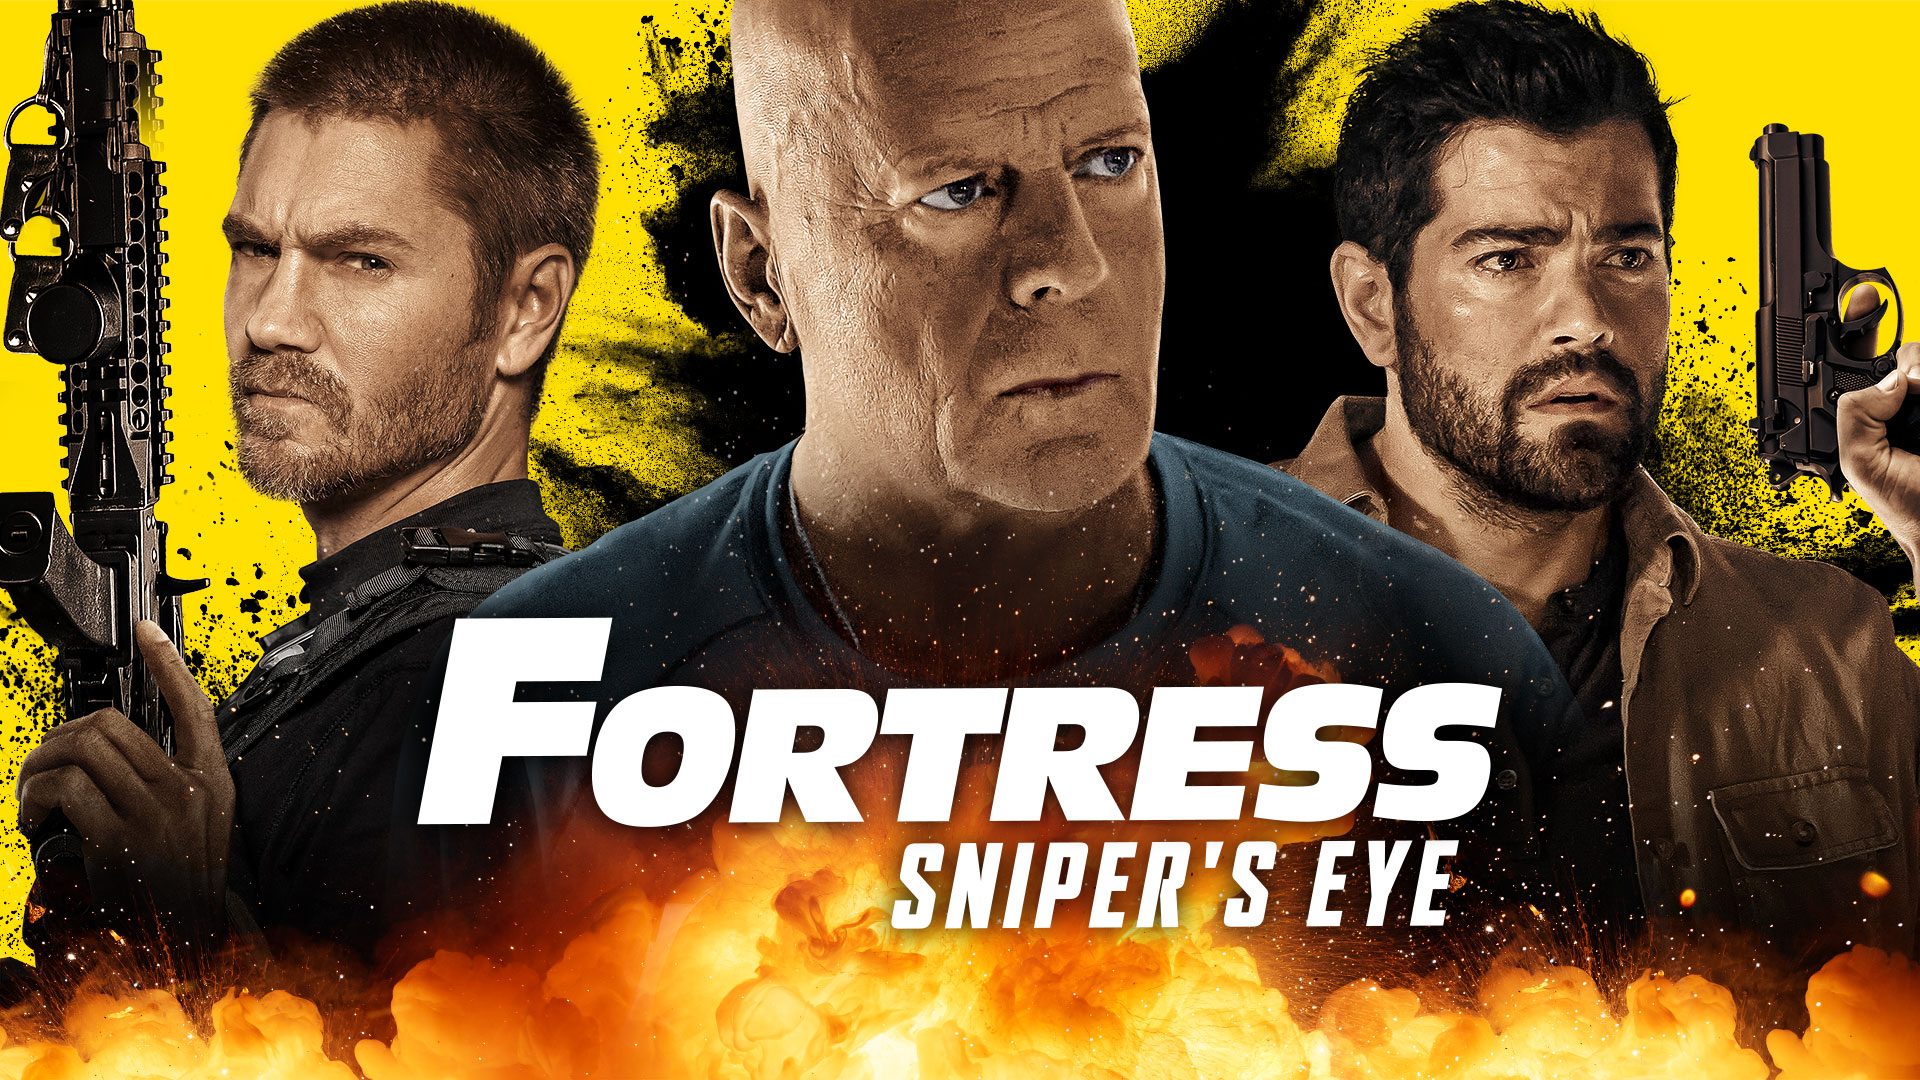 Fortress: Sniperu0027s Eye (2022) Official Trailer - Jesse Metcalfe, Bruce Willis, Chad Michael Murray